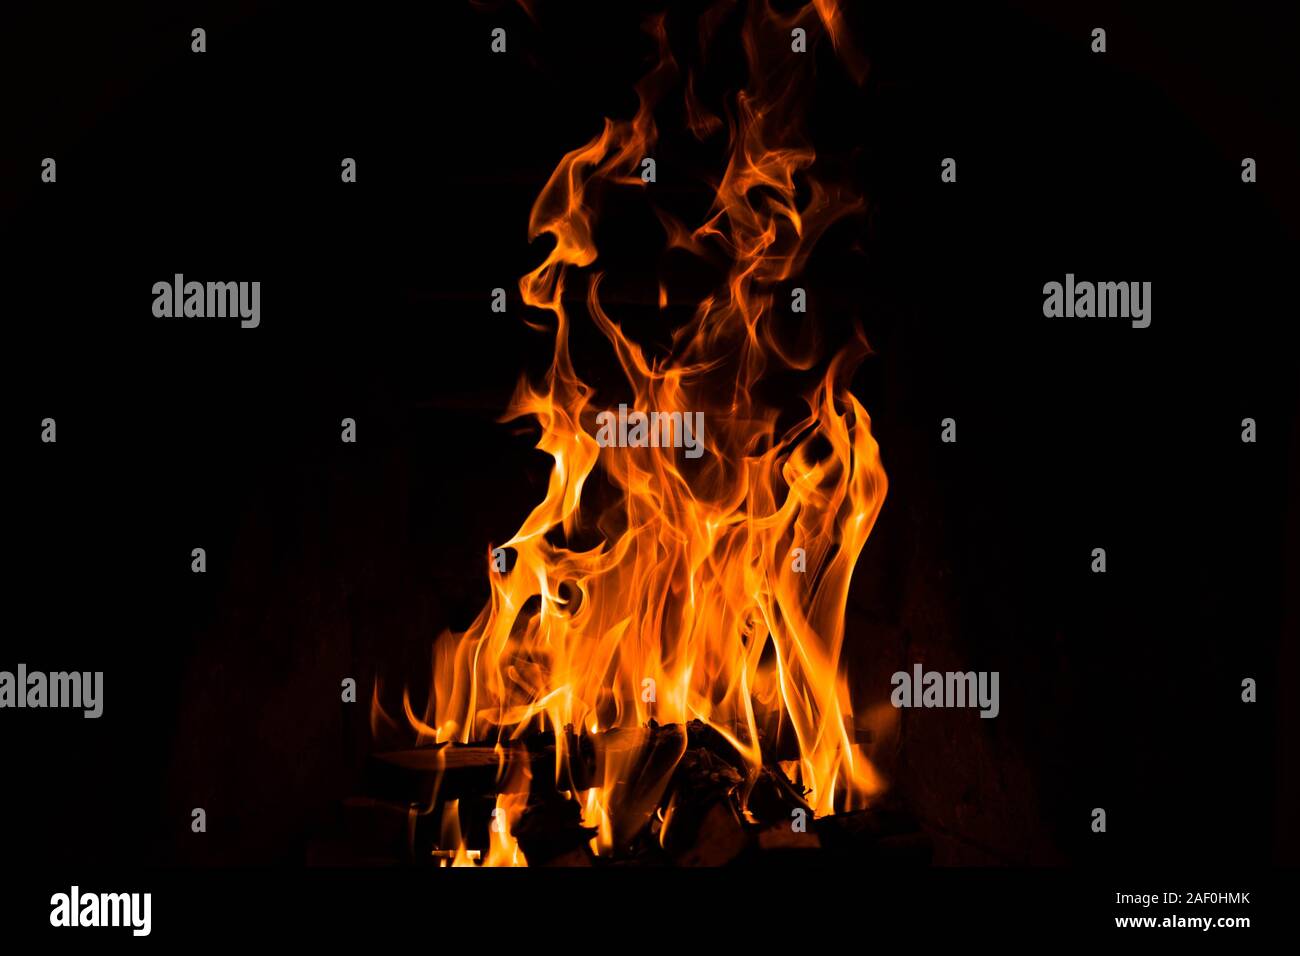 Fire on a black background. fireplace concept Stock Photo